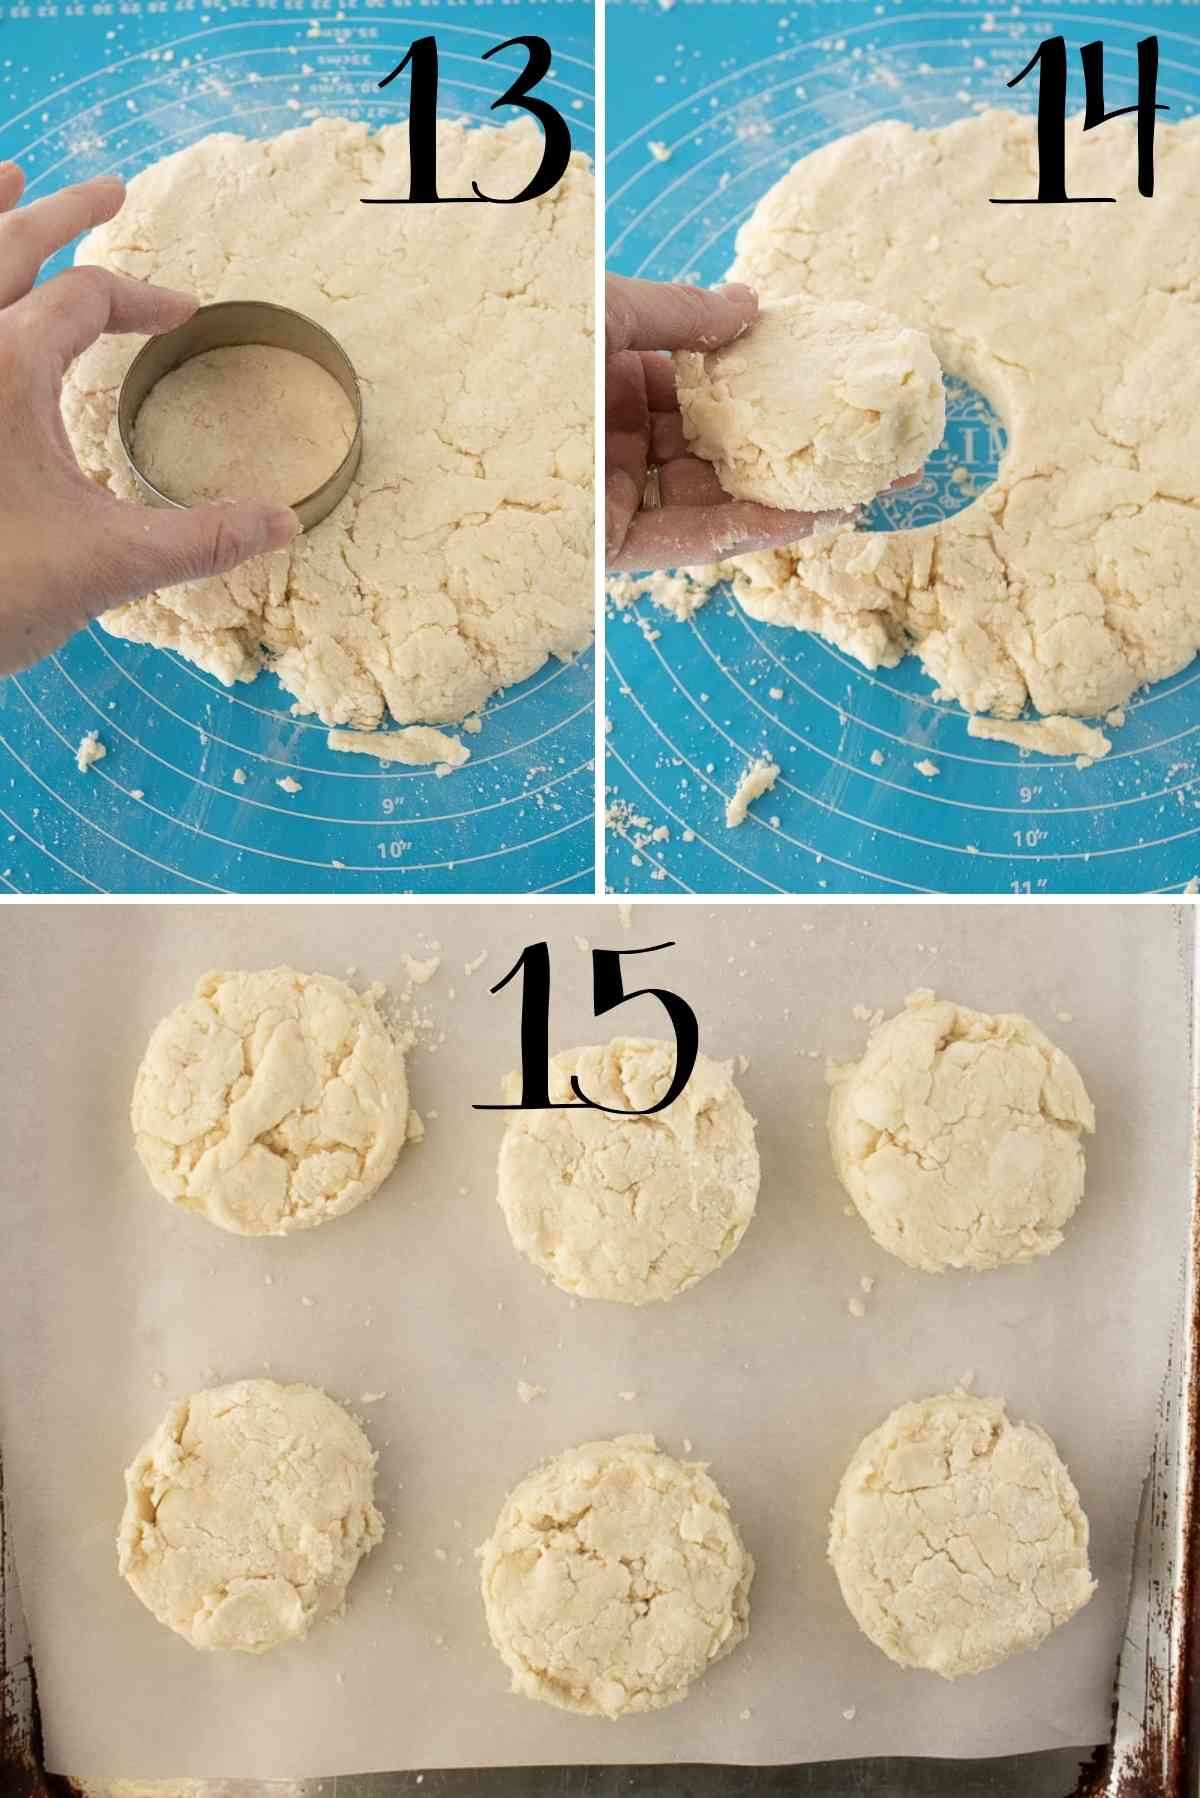 Cut out biscuits by pressing the cutter straight down without twisting.